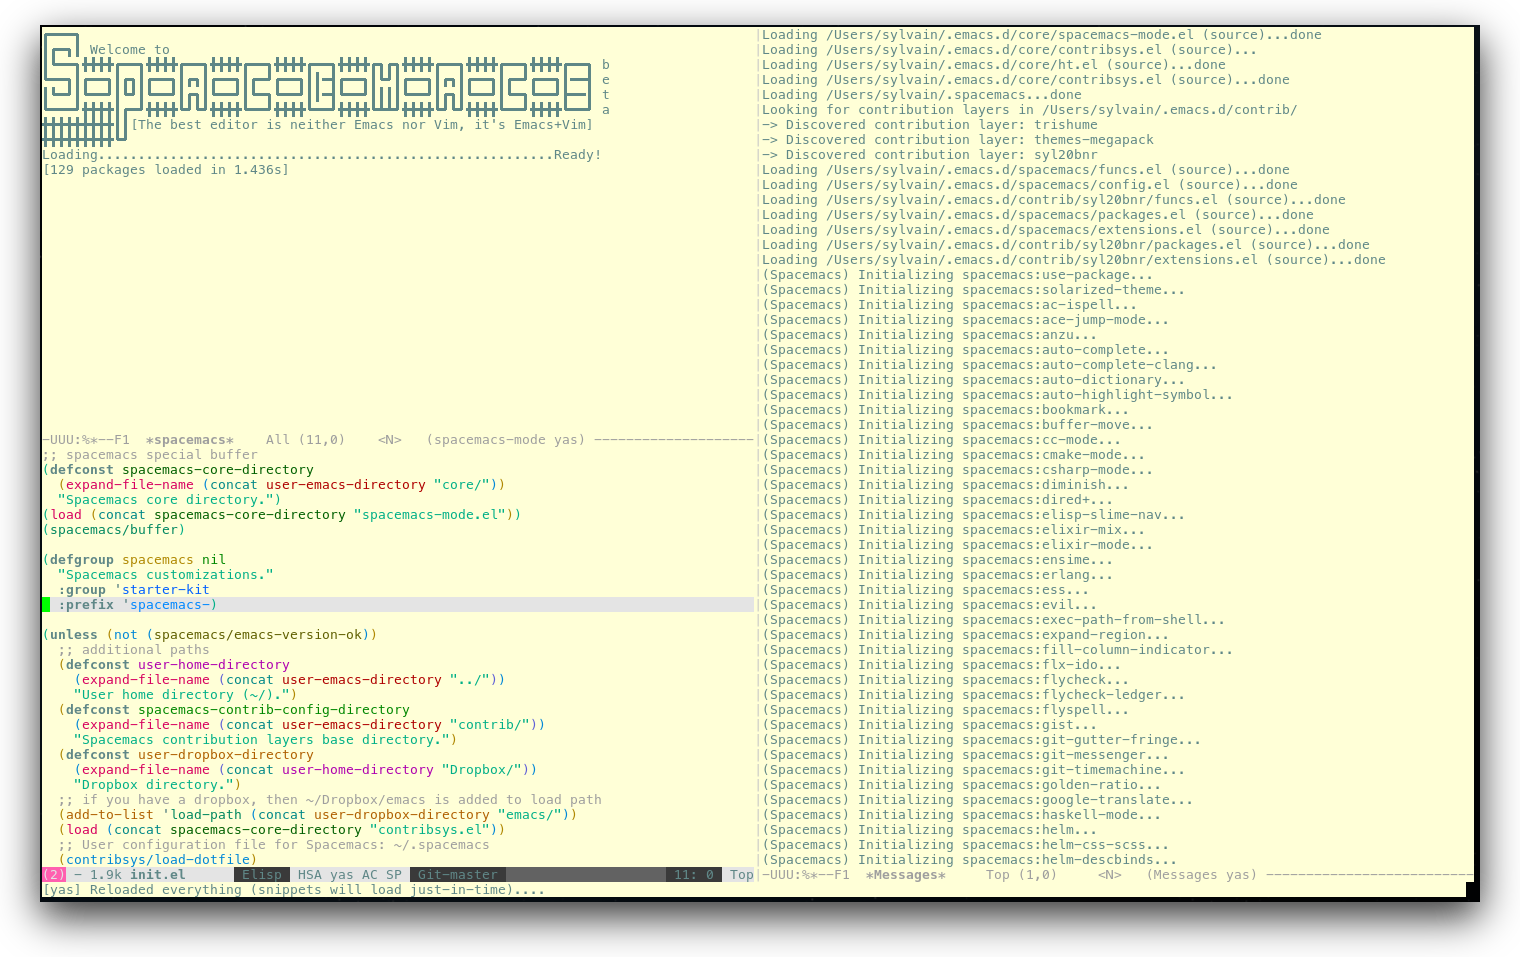 /TakeV/spacemacs/media/commit/af03fb55ffdc511e582283e65c5ba359d6231514/doc/img/spacemacs-urxvt.png